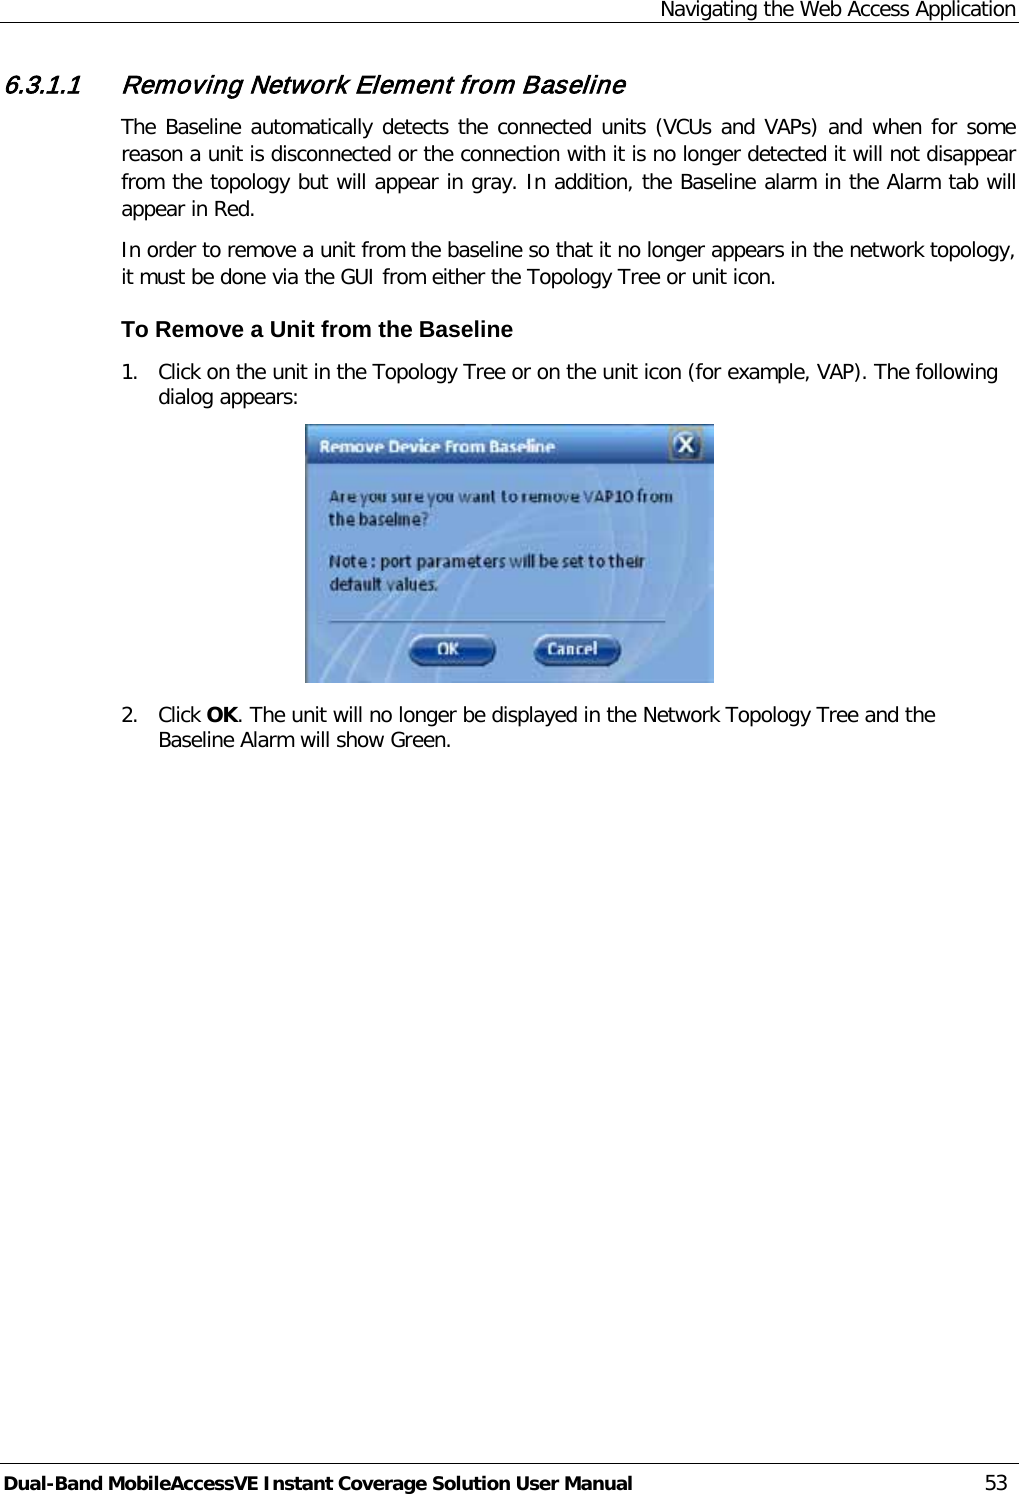 Navigating the Web Access Application Dual-Band MobileAccessVE Instant Coverage Solution User Manual 53 6.3.1.1 Removing Network Element from Baseline The Baseline automatically detects the connected units (VCUs and VAPs) and when for some reason a unit is disconnected or the connection with it is no longer detected it will not disappear from the topology but will appear in gray. In addition, the Baseline alarm in the Alarm tab will appear in Red. In order to remove a unit from the baseline so that it no longer appears in the network topology, it must be done via the GUI from either the Topology Tree or unit icon. To Remove a Unit from the Baseline 1.  Click on the unit in the Topology Tree or on the unit icon (for example, VAP). The following dialog appears:  2.  Click OK. The unit will no longer be displayed in the Network Topology Tree and the Baseline Alarm will show Green.   